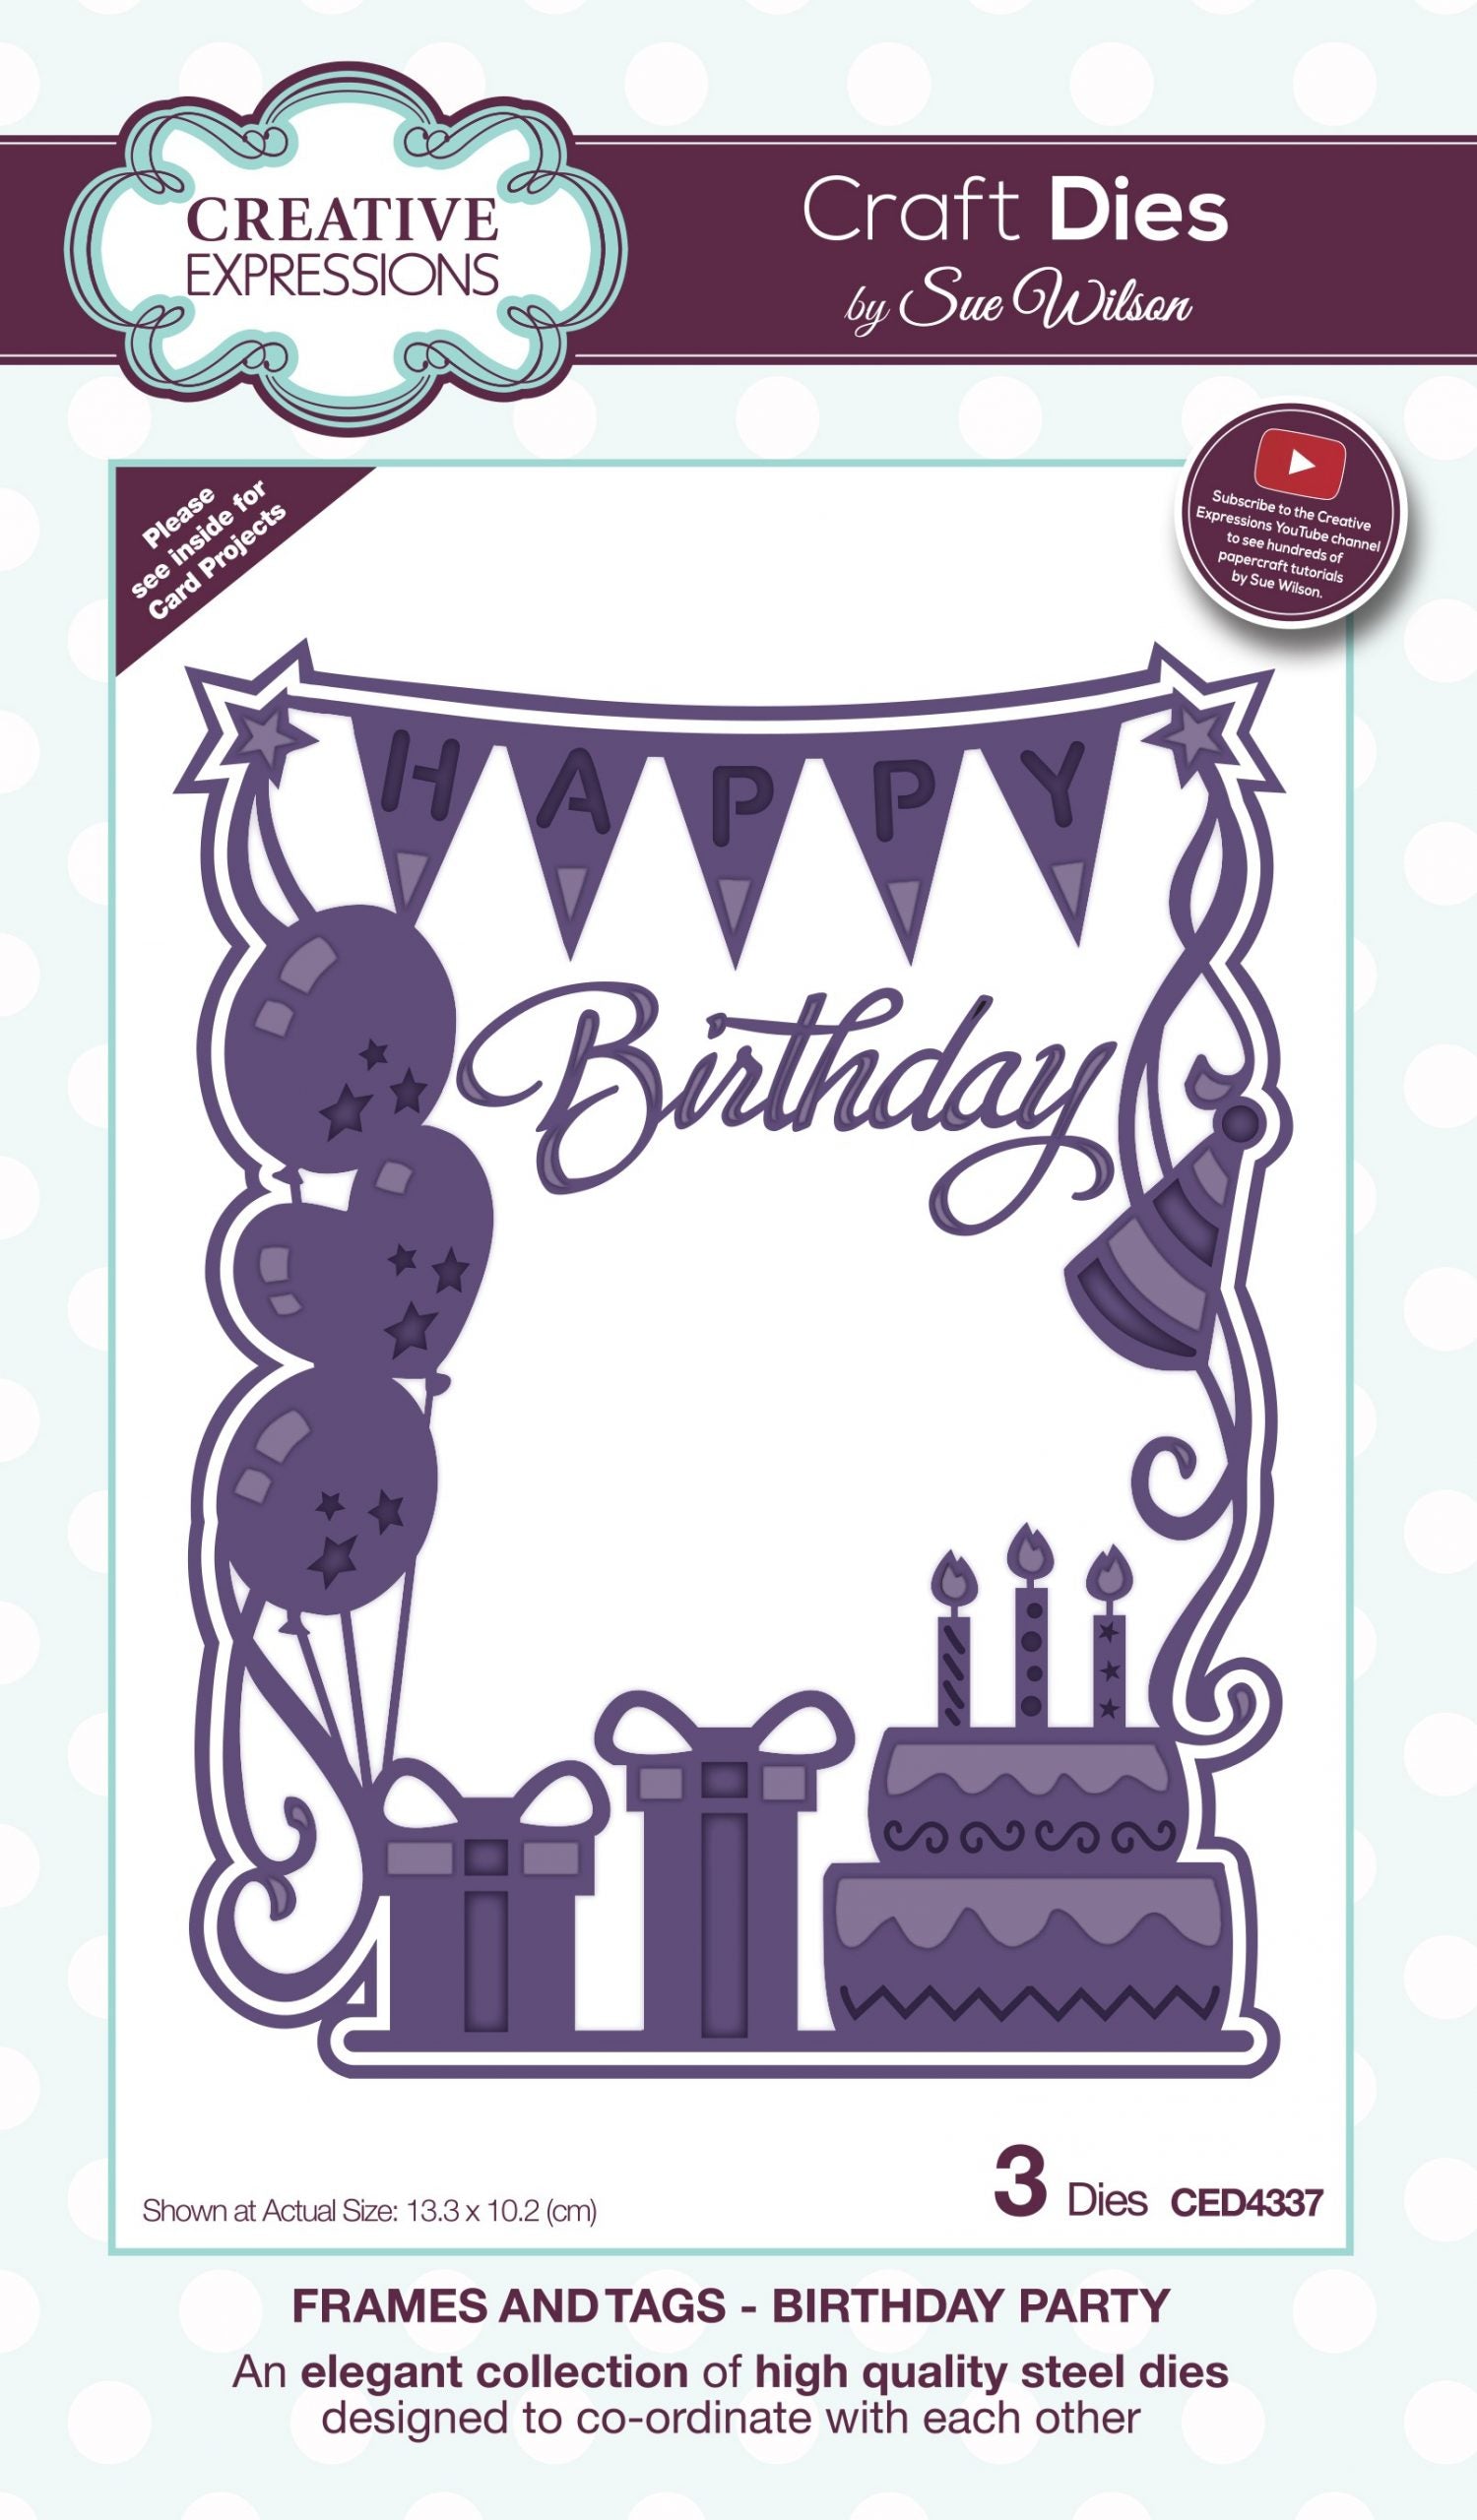 Creative Expression - Frames and Tags - Birthday Party